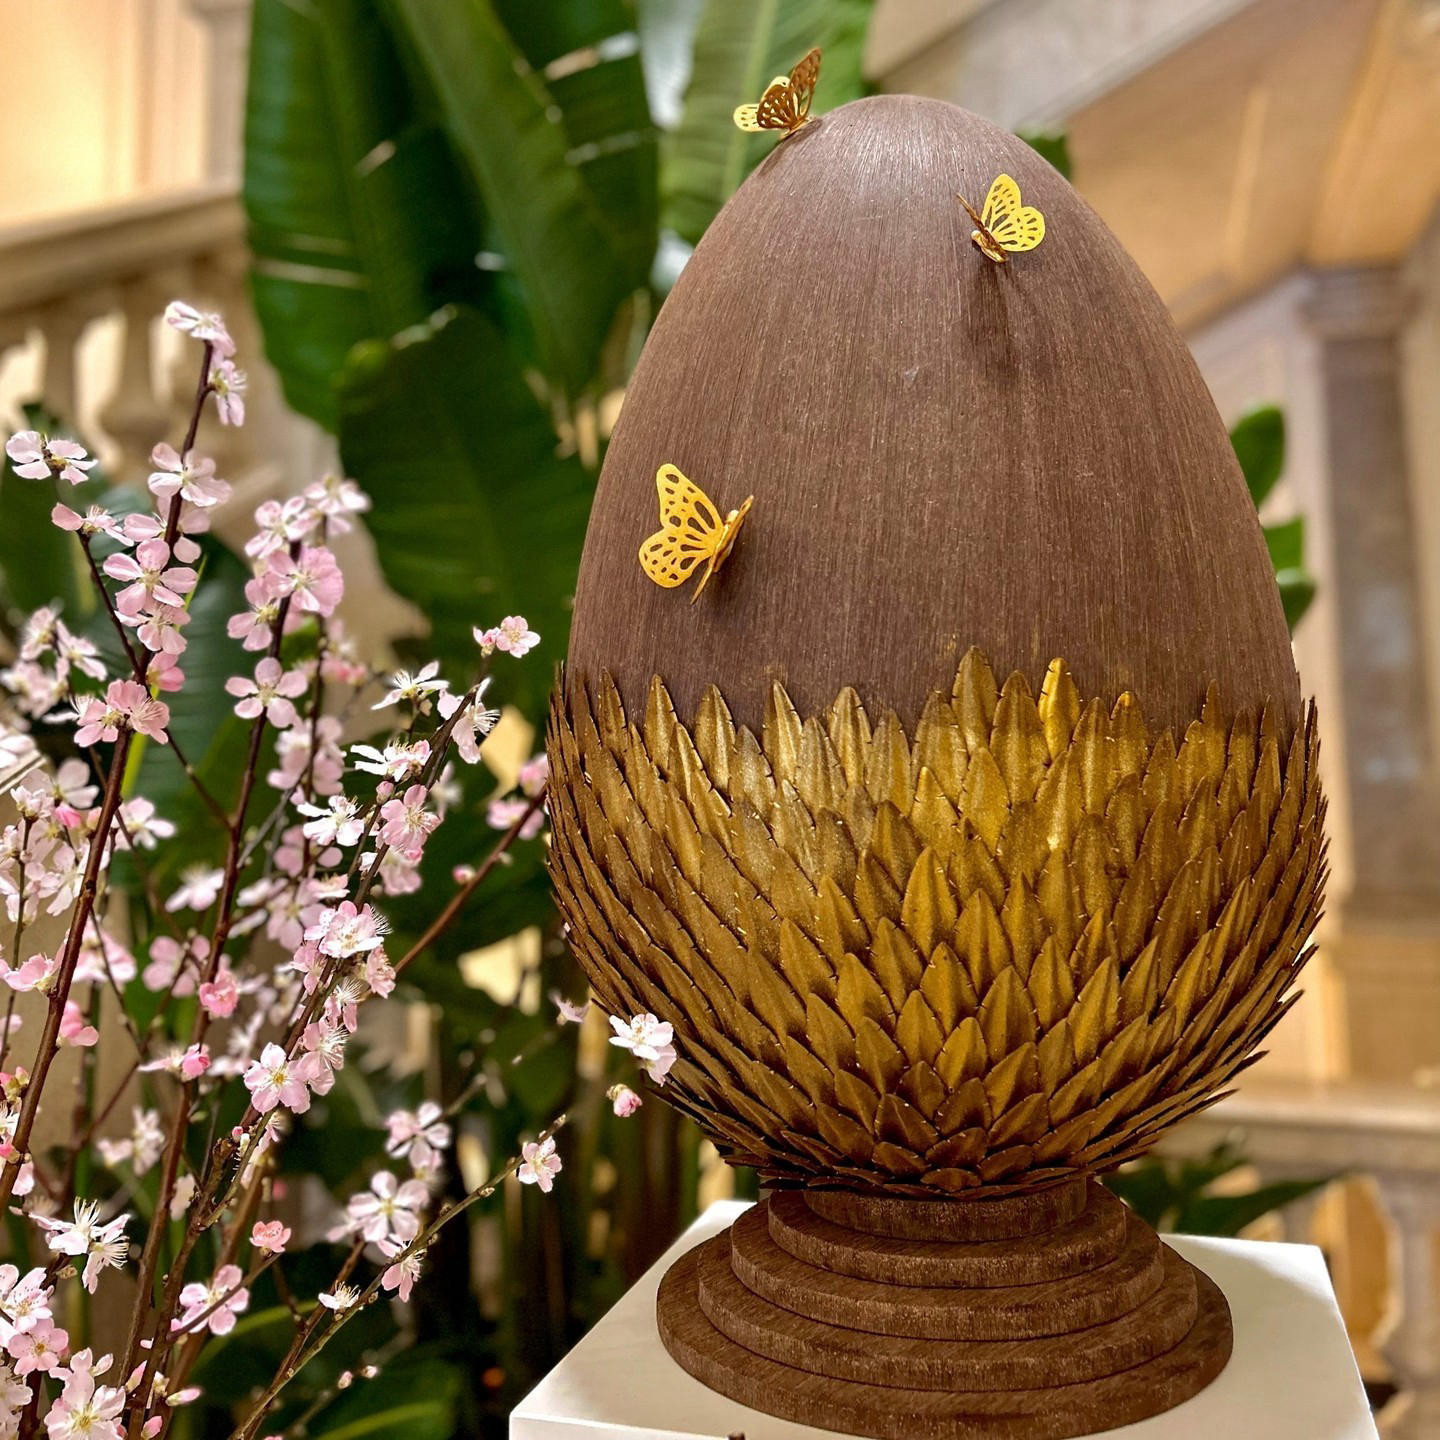 The Excelsior Hotel Gallia and its marvelous team wish you a very happy Easter, made of sweetness an